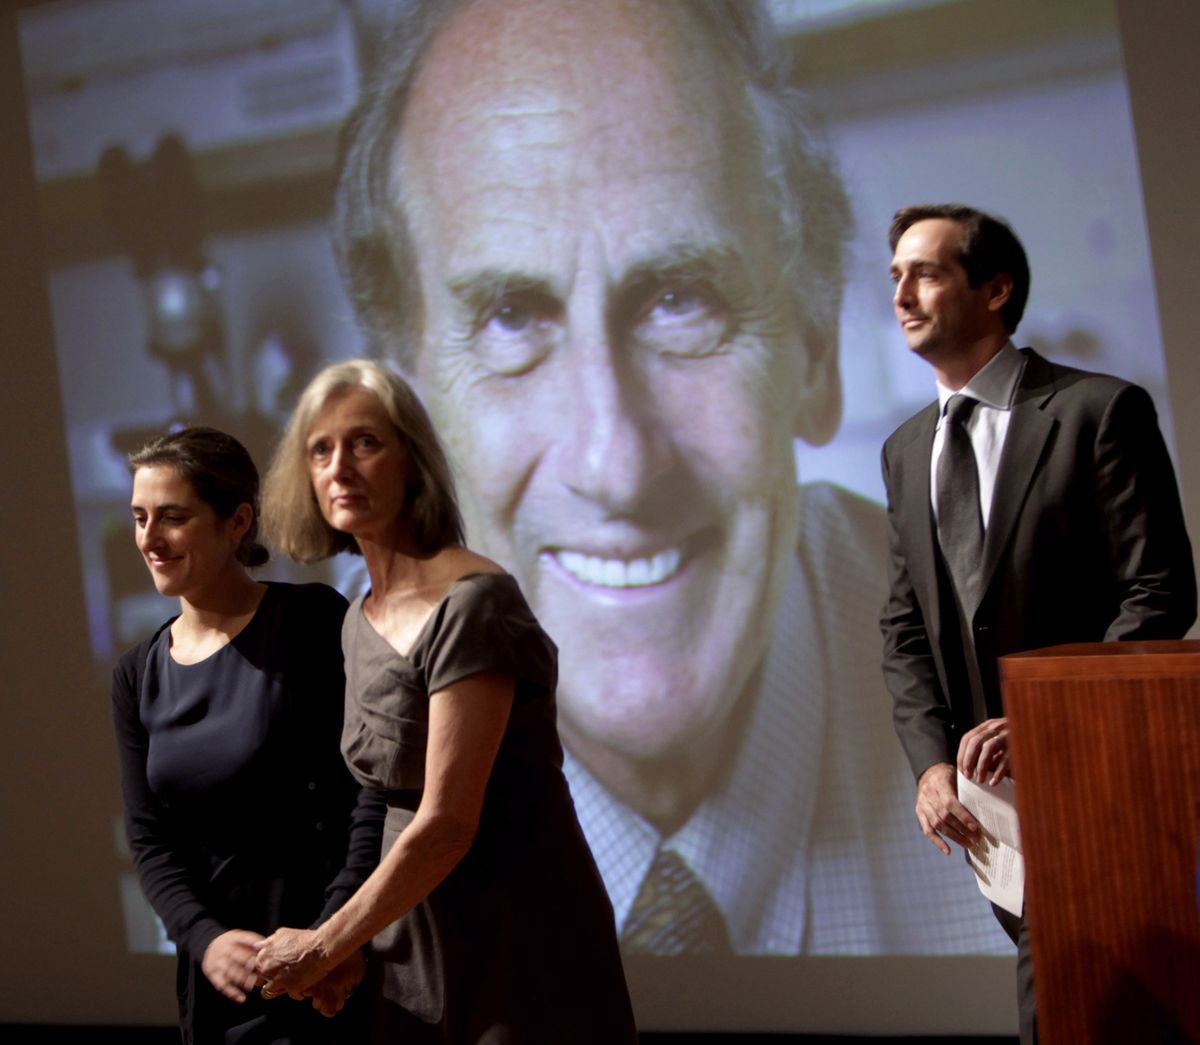 Family members of Nobel prize winner Ralph Steinman walk in front of a picture of Steinman during a ceremony honoring him at Rockefeller University in New York, Monday, Oct. 3, 2011. From left to right are daughter Lesley Steinman, wife Claudia Steinman and son Adam Steinman. Canadian-born Ralph Steinman, a cell biologist, was awarded the Nobel Prize in medicine on Monday for his discoveries about the immune system, but hours later his university said that he had died three days earlier. The Nobel committee had been unaware of his death. (Seth Wenig / Associated Press)